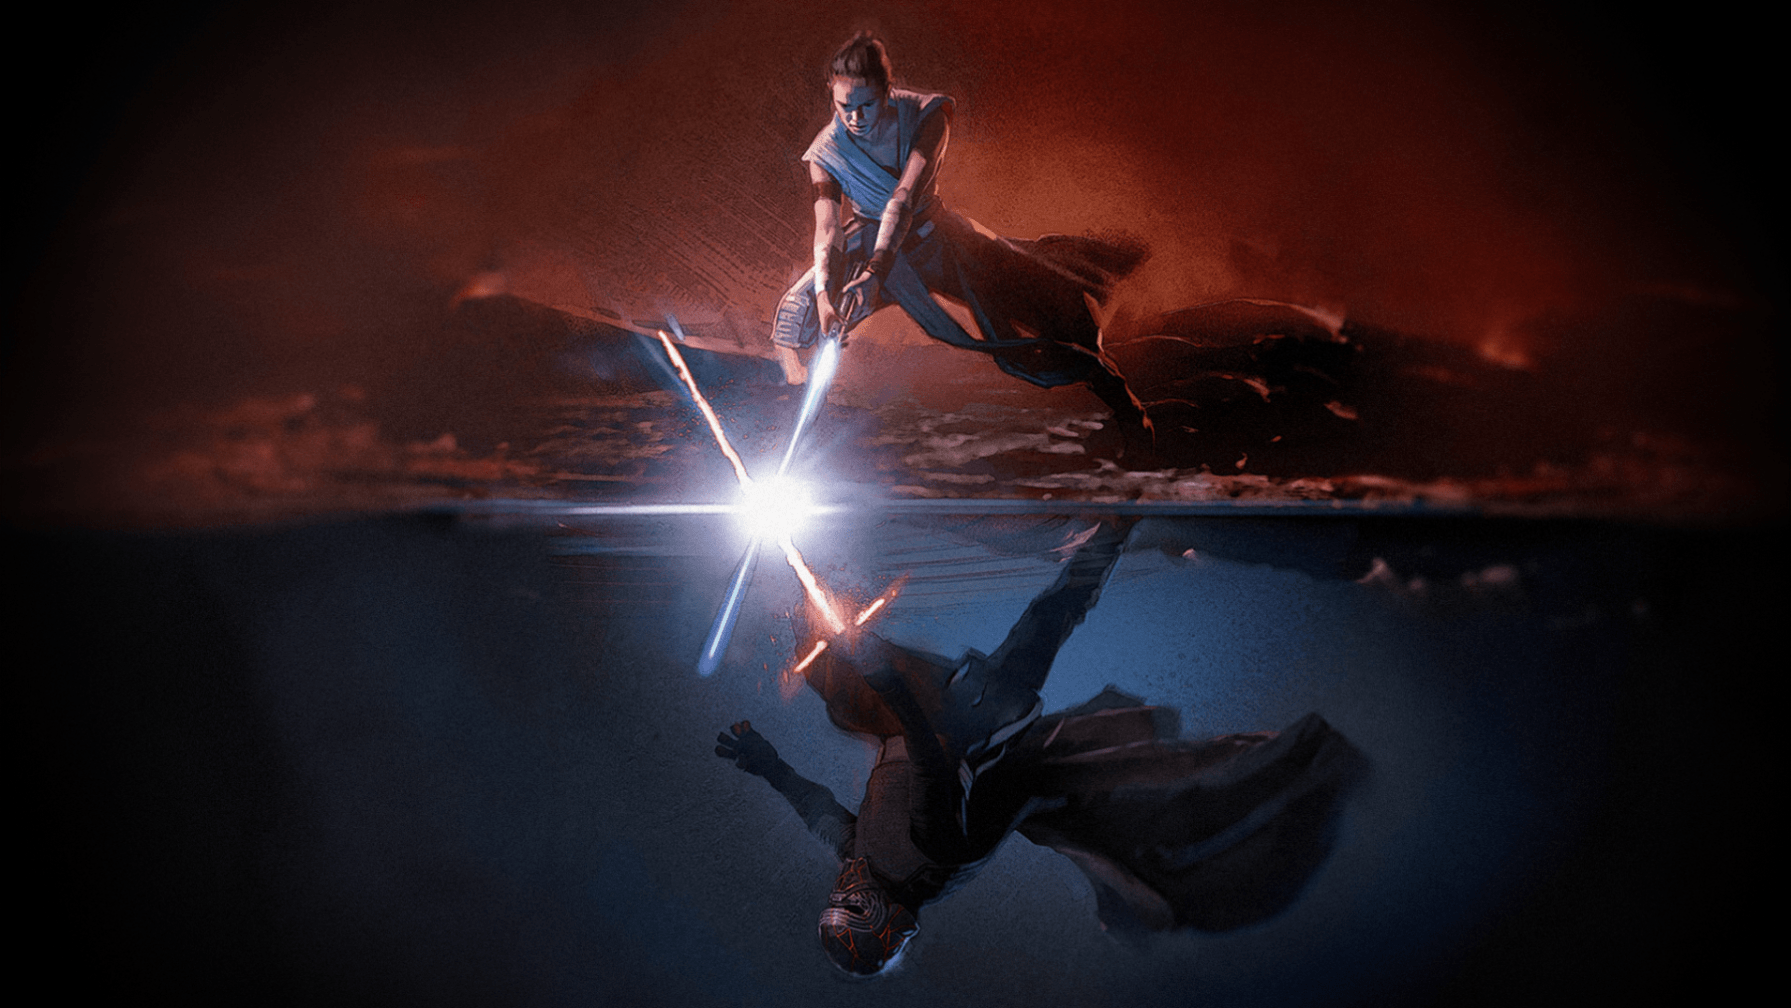 Star Wars: The Rise Of Skywalker Wallpapers